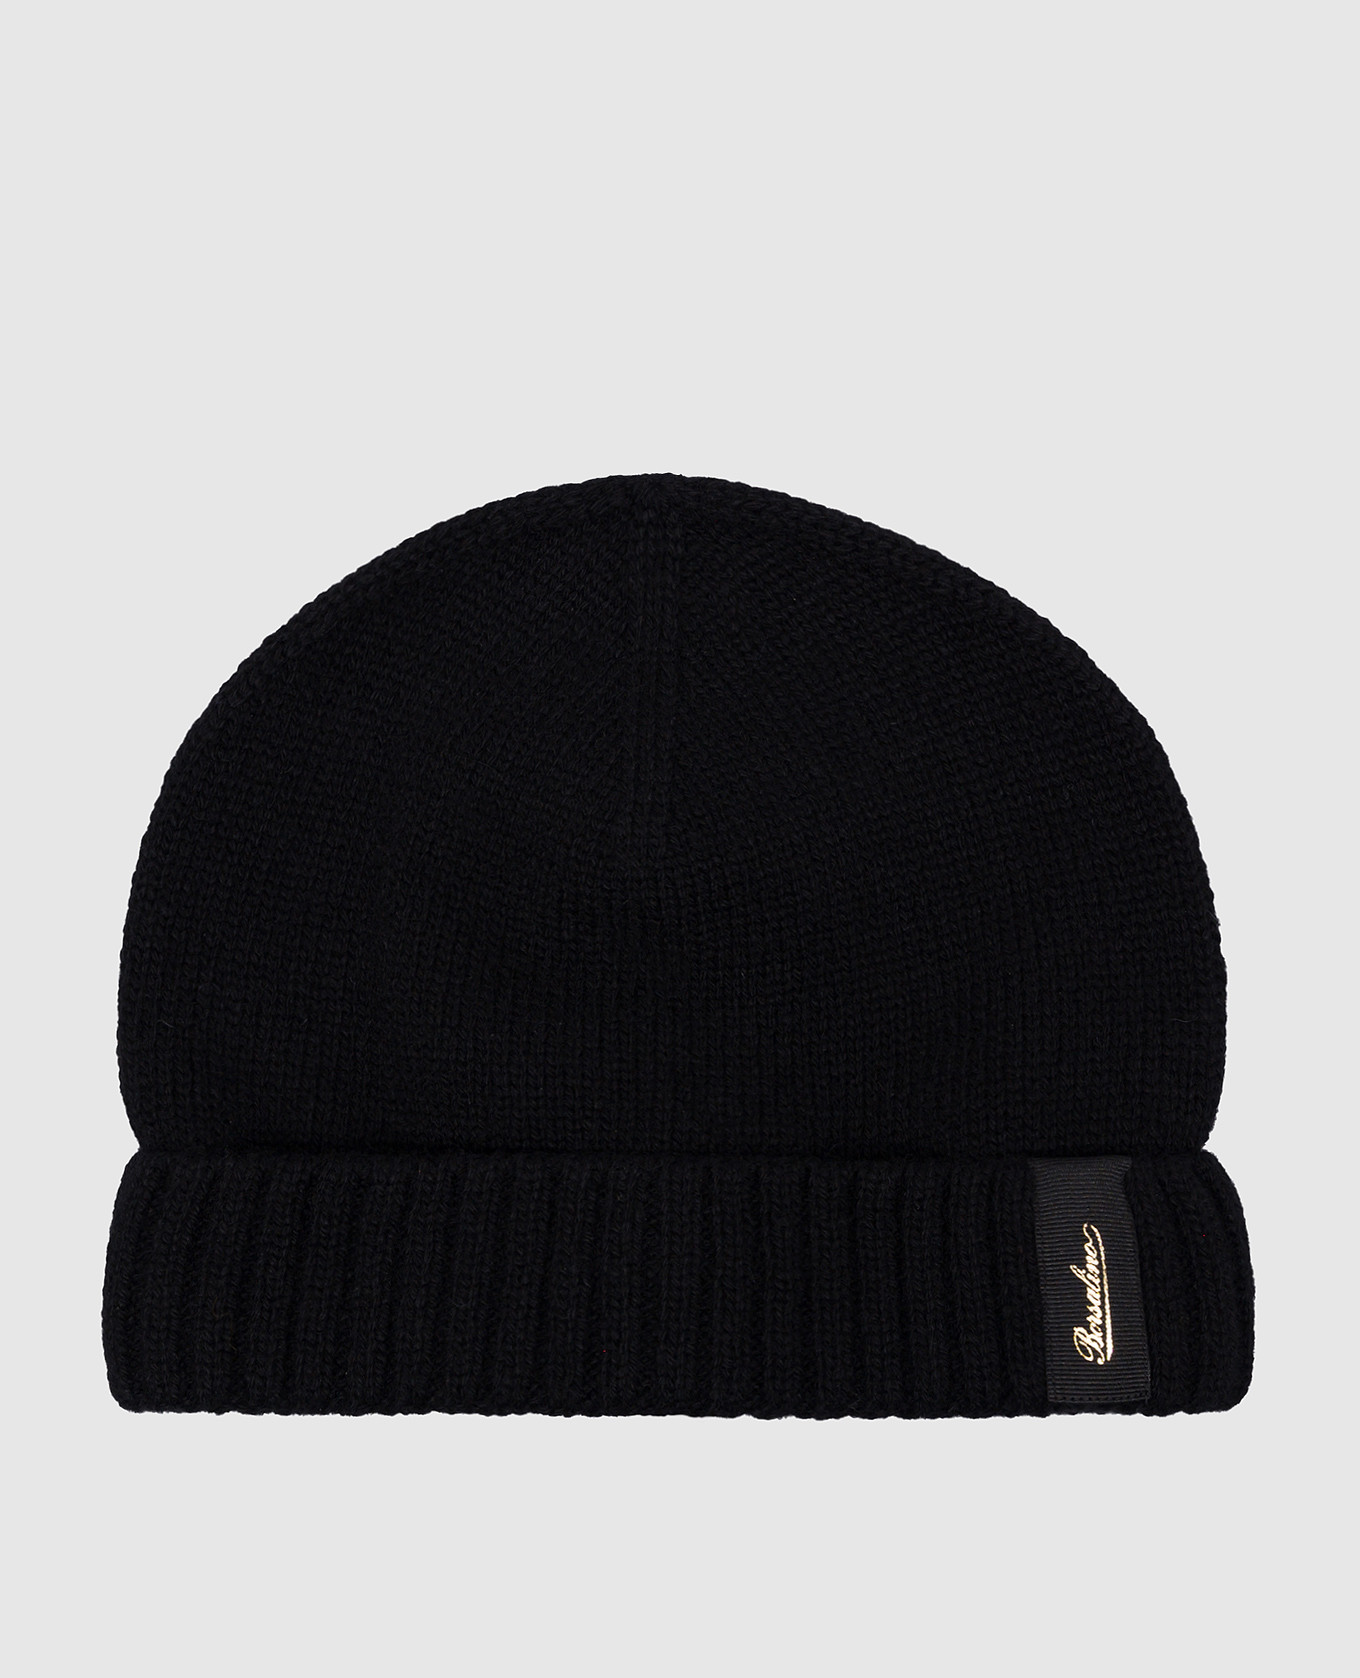 Black cashmere hat with logo